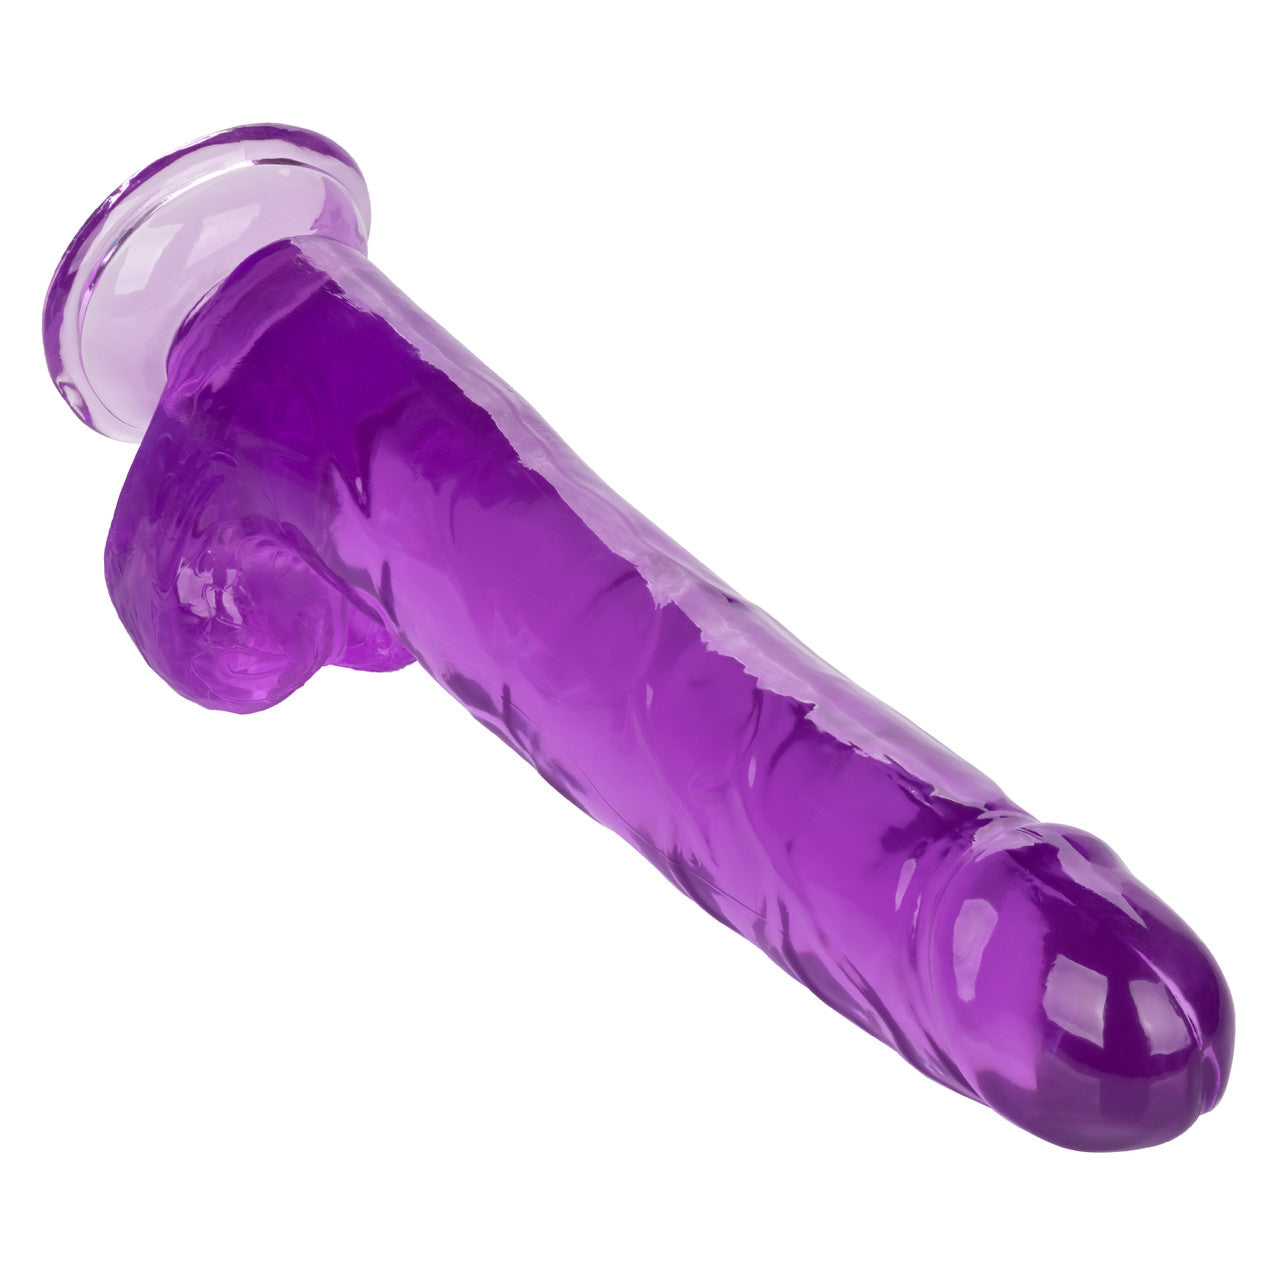 Size Queen 10"/25.5 cm Dildo - Purple - Thorn & Feather Sex Toy Canada